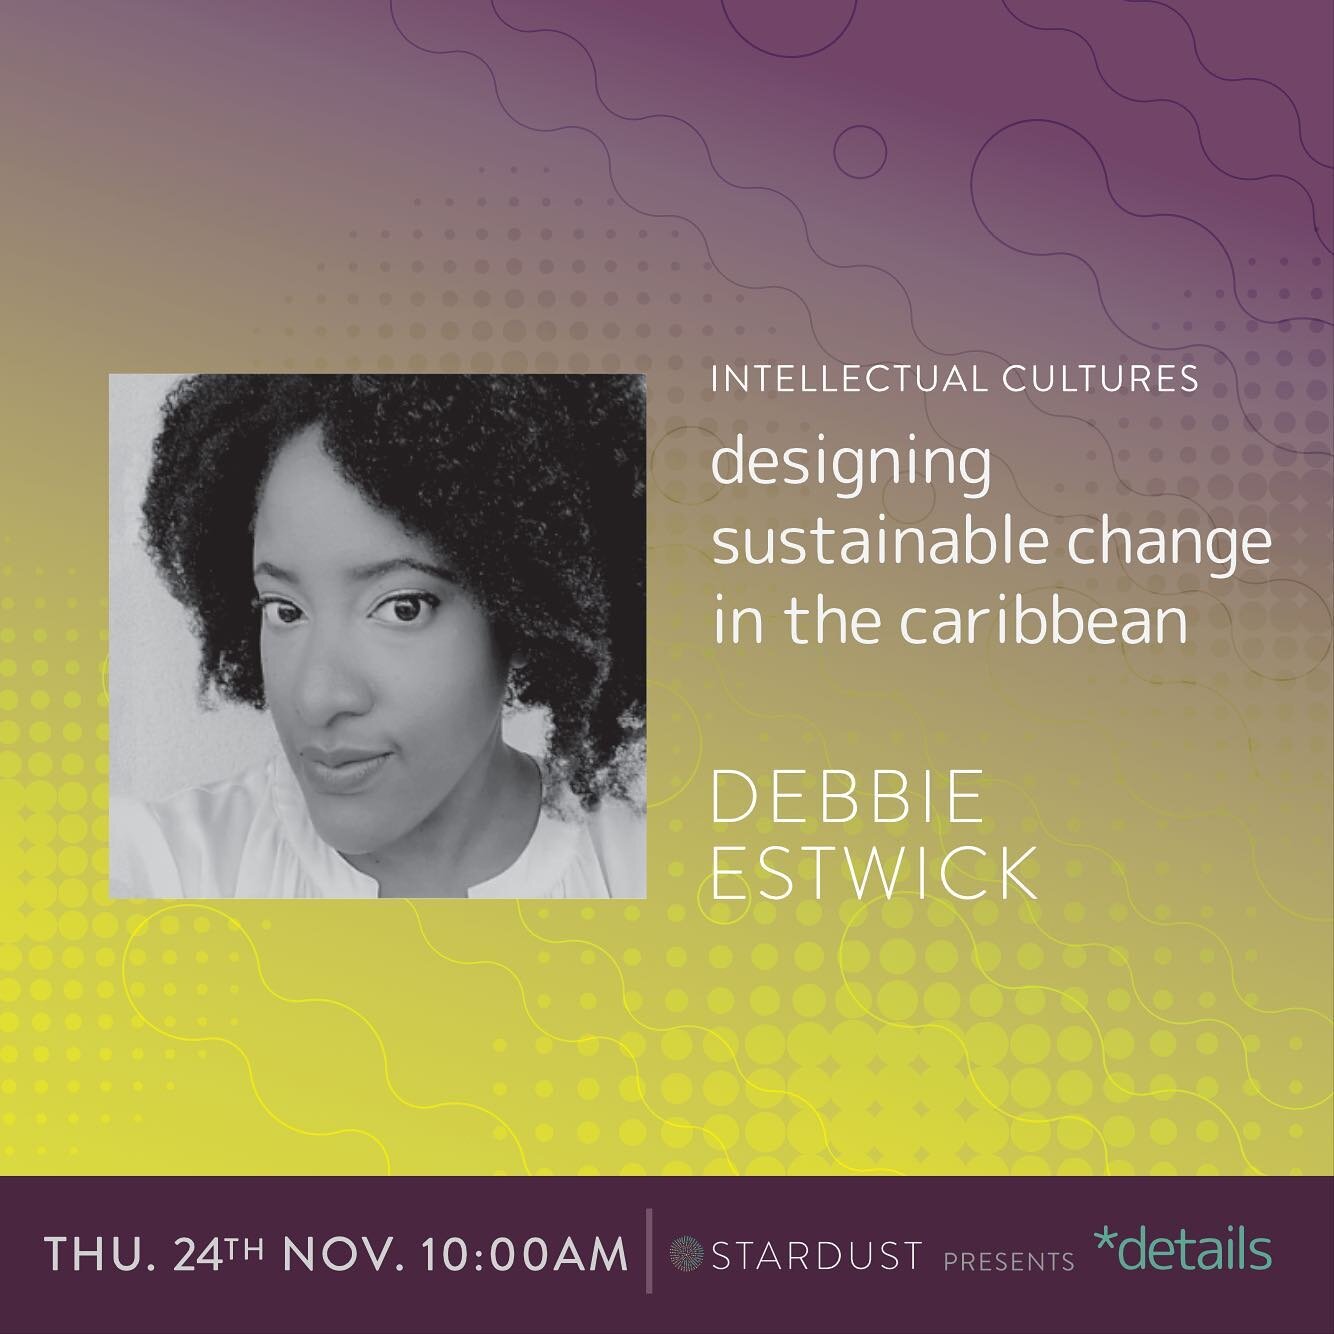 🎉 Introducing this week&rsquo;s speakers ✨ Meet Debbie Estwick, whose work within the private, public and social sectors provides a rare plurality essential for solving complex problems where worlds collide.

🌎 She has extensive professional experi